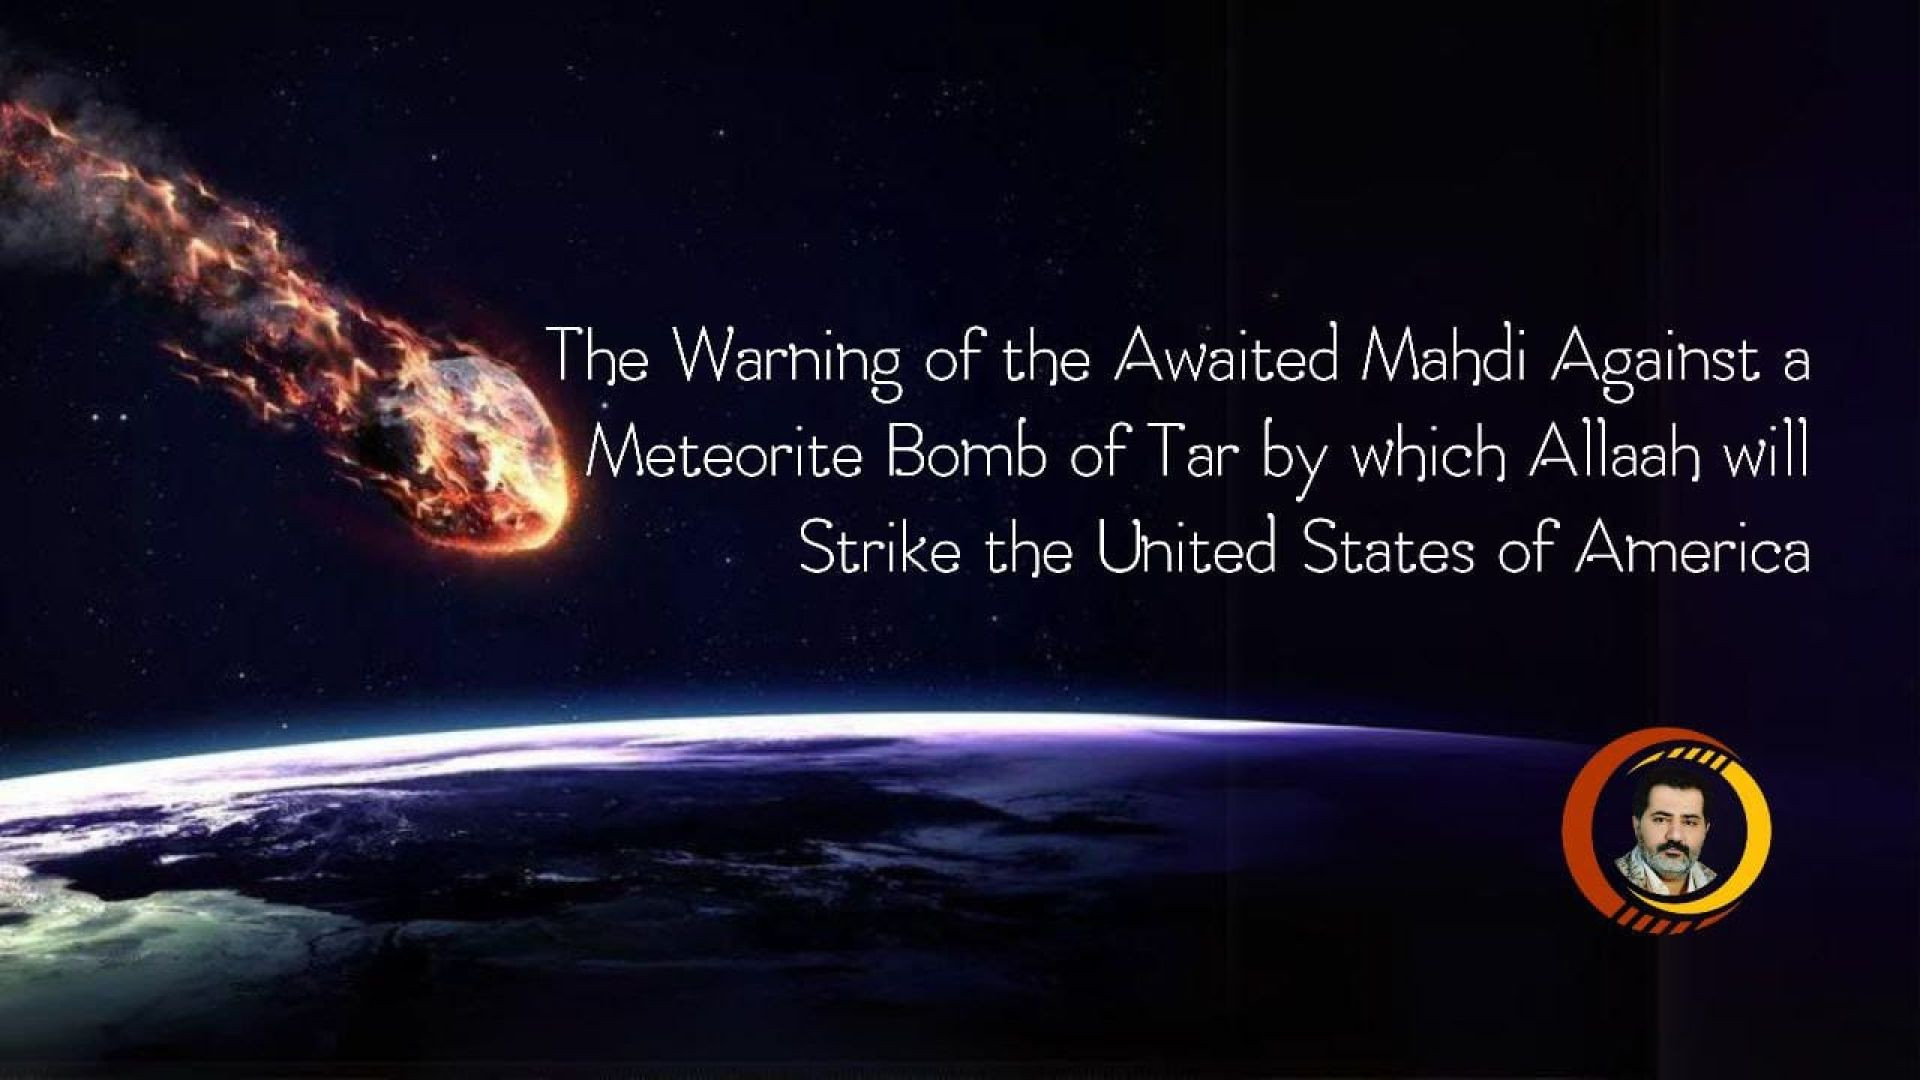 The Warning of the Awaited Mahdi Against a Meteorite Bomb of Tar by which Allaah will Strike the United States of America